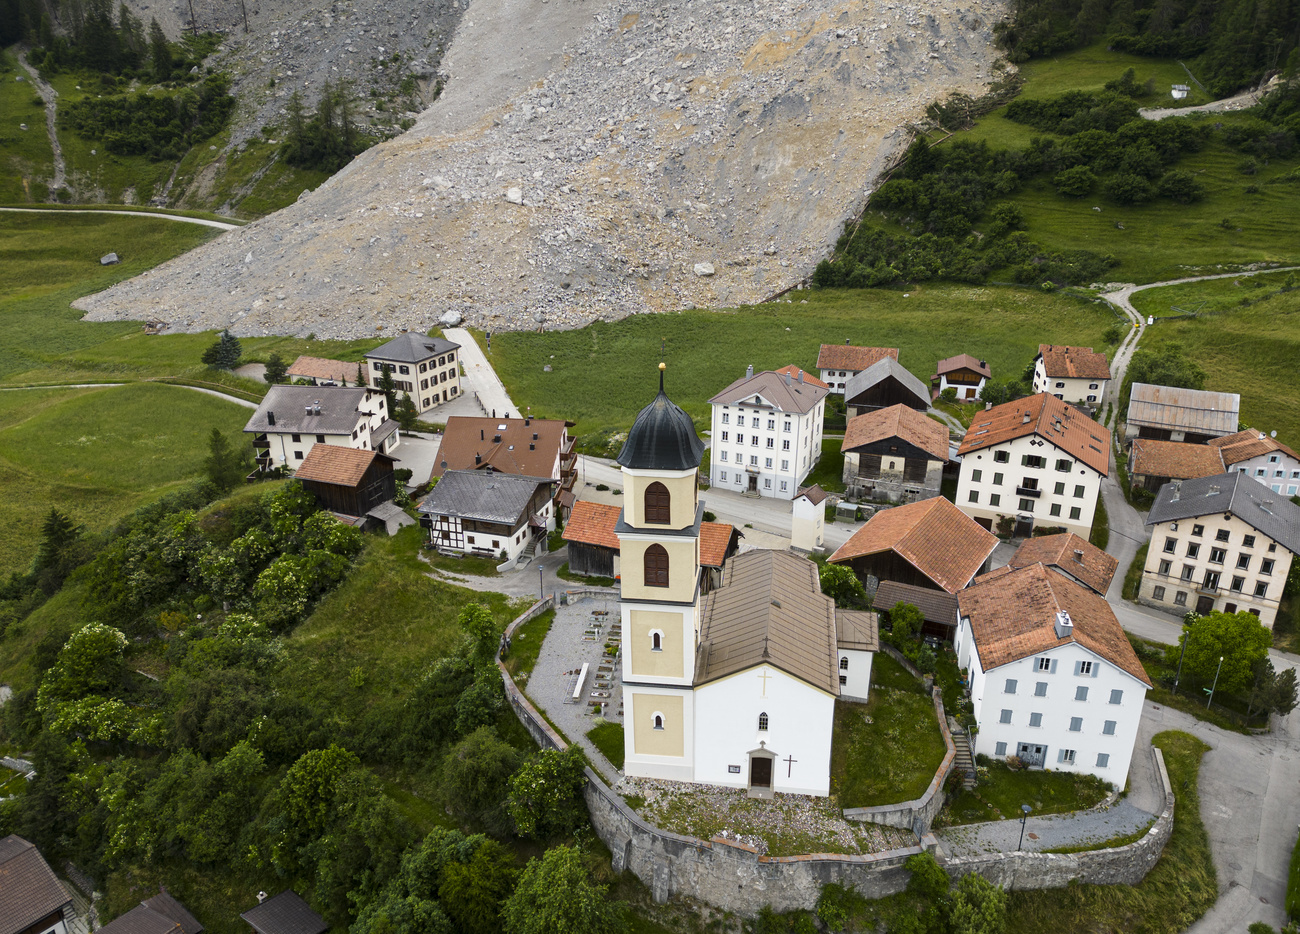 Drone picture of the landslide near Brienz.